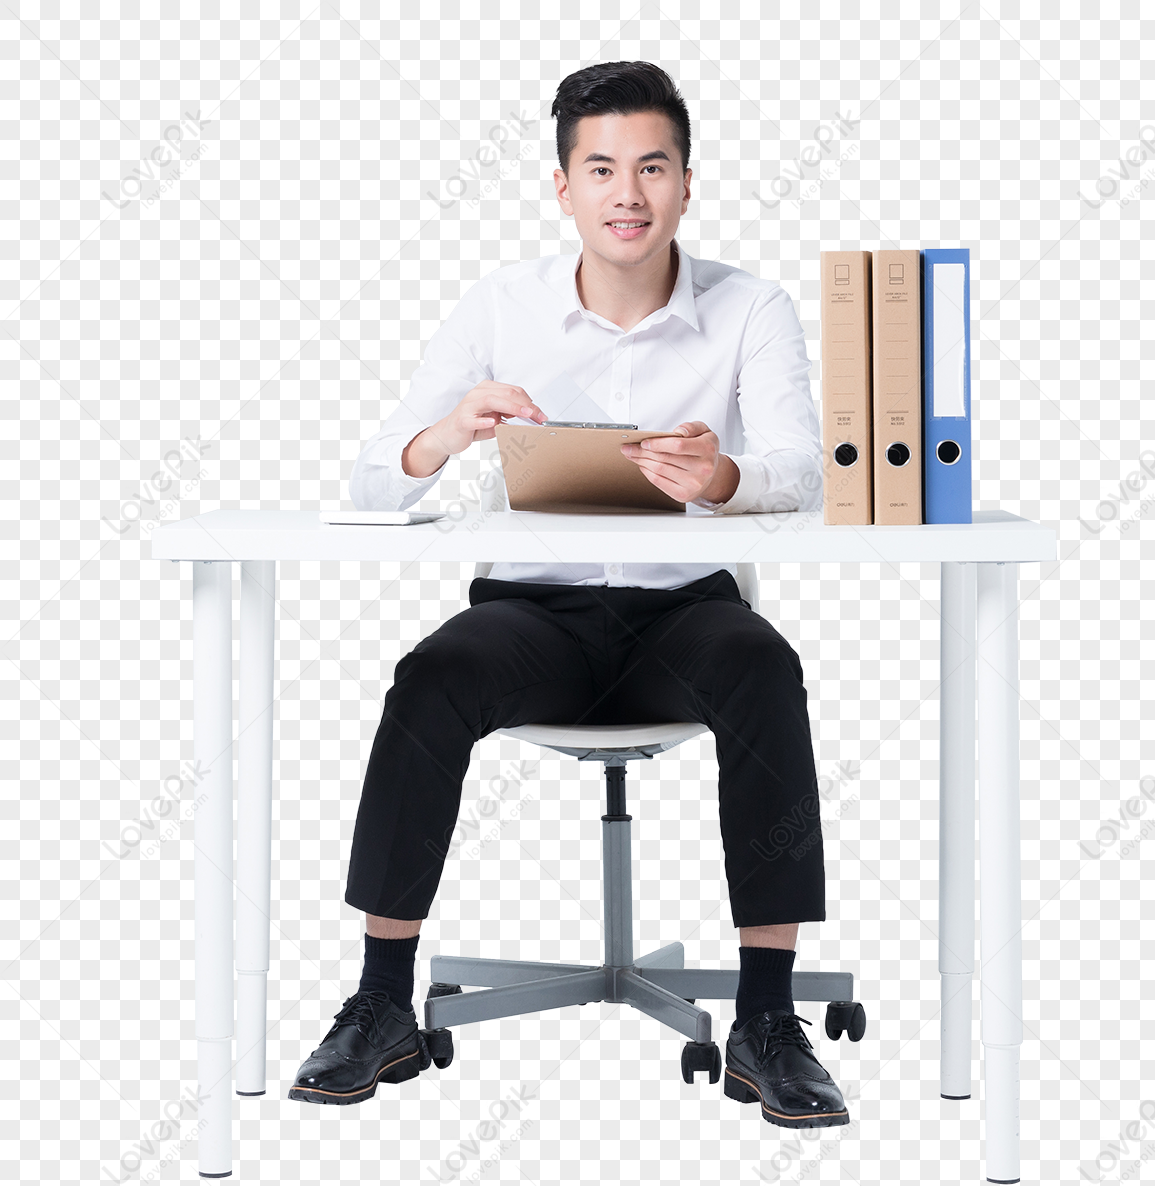 A picture of a business person sitting at a desk, people sitting, business pictures, desk png transparent background